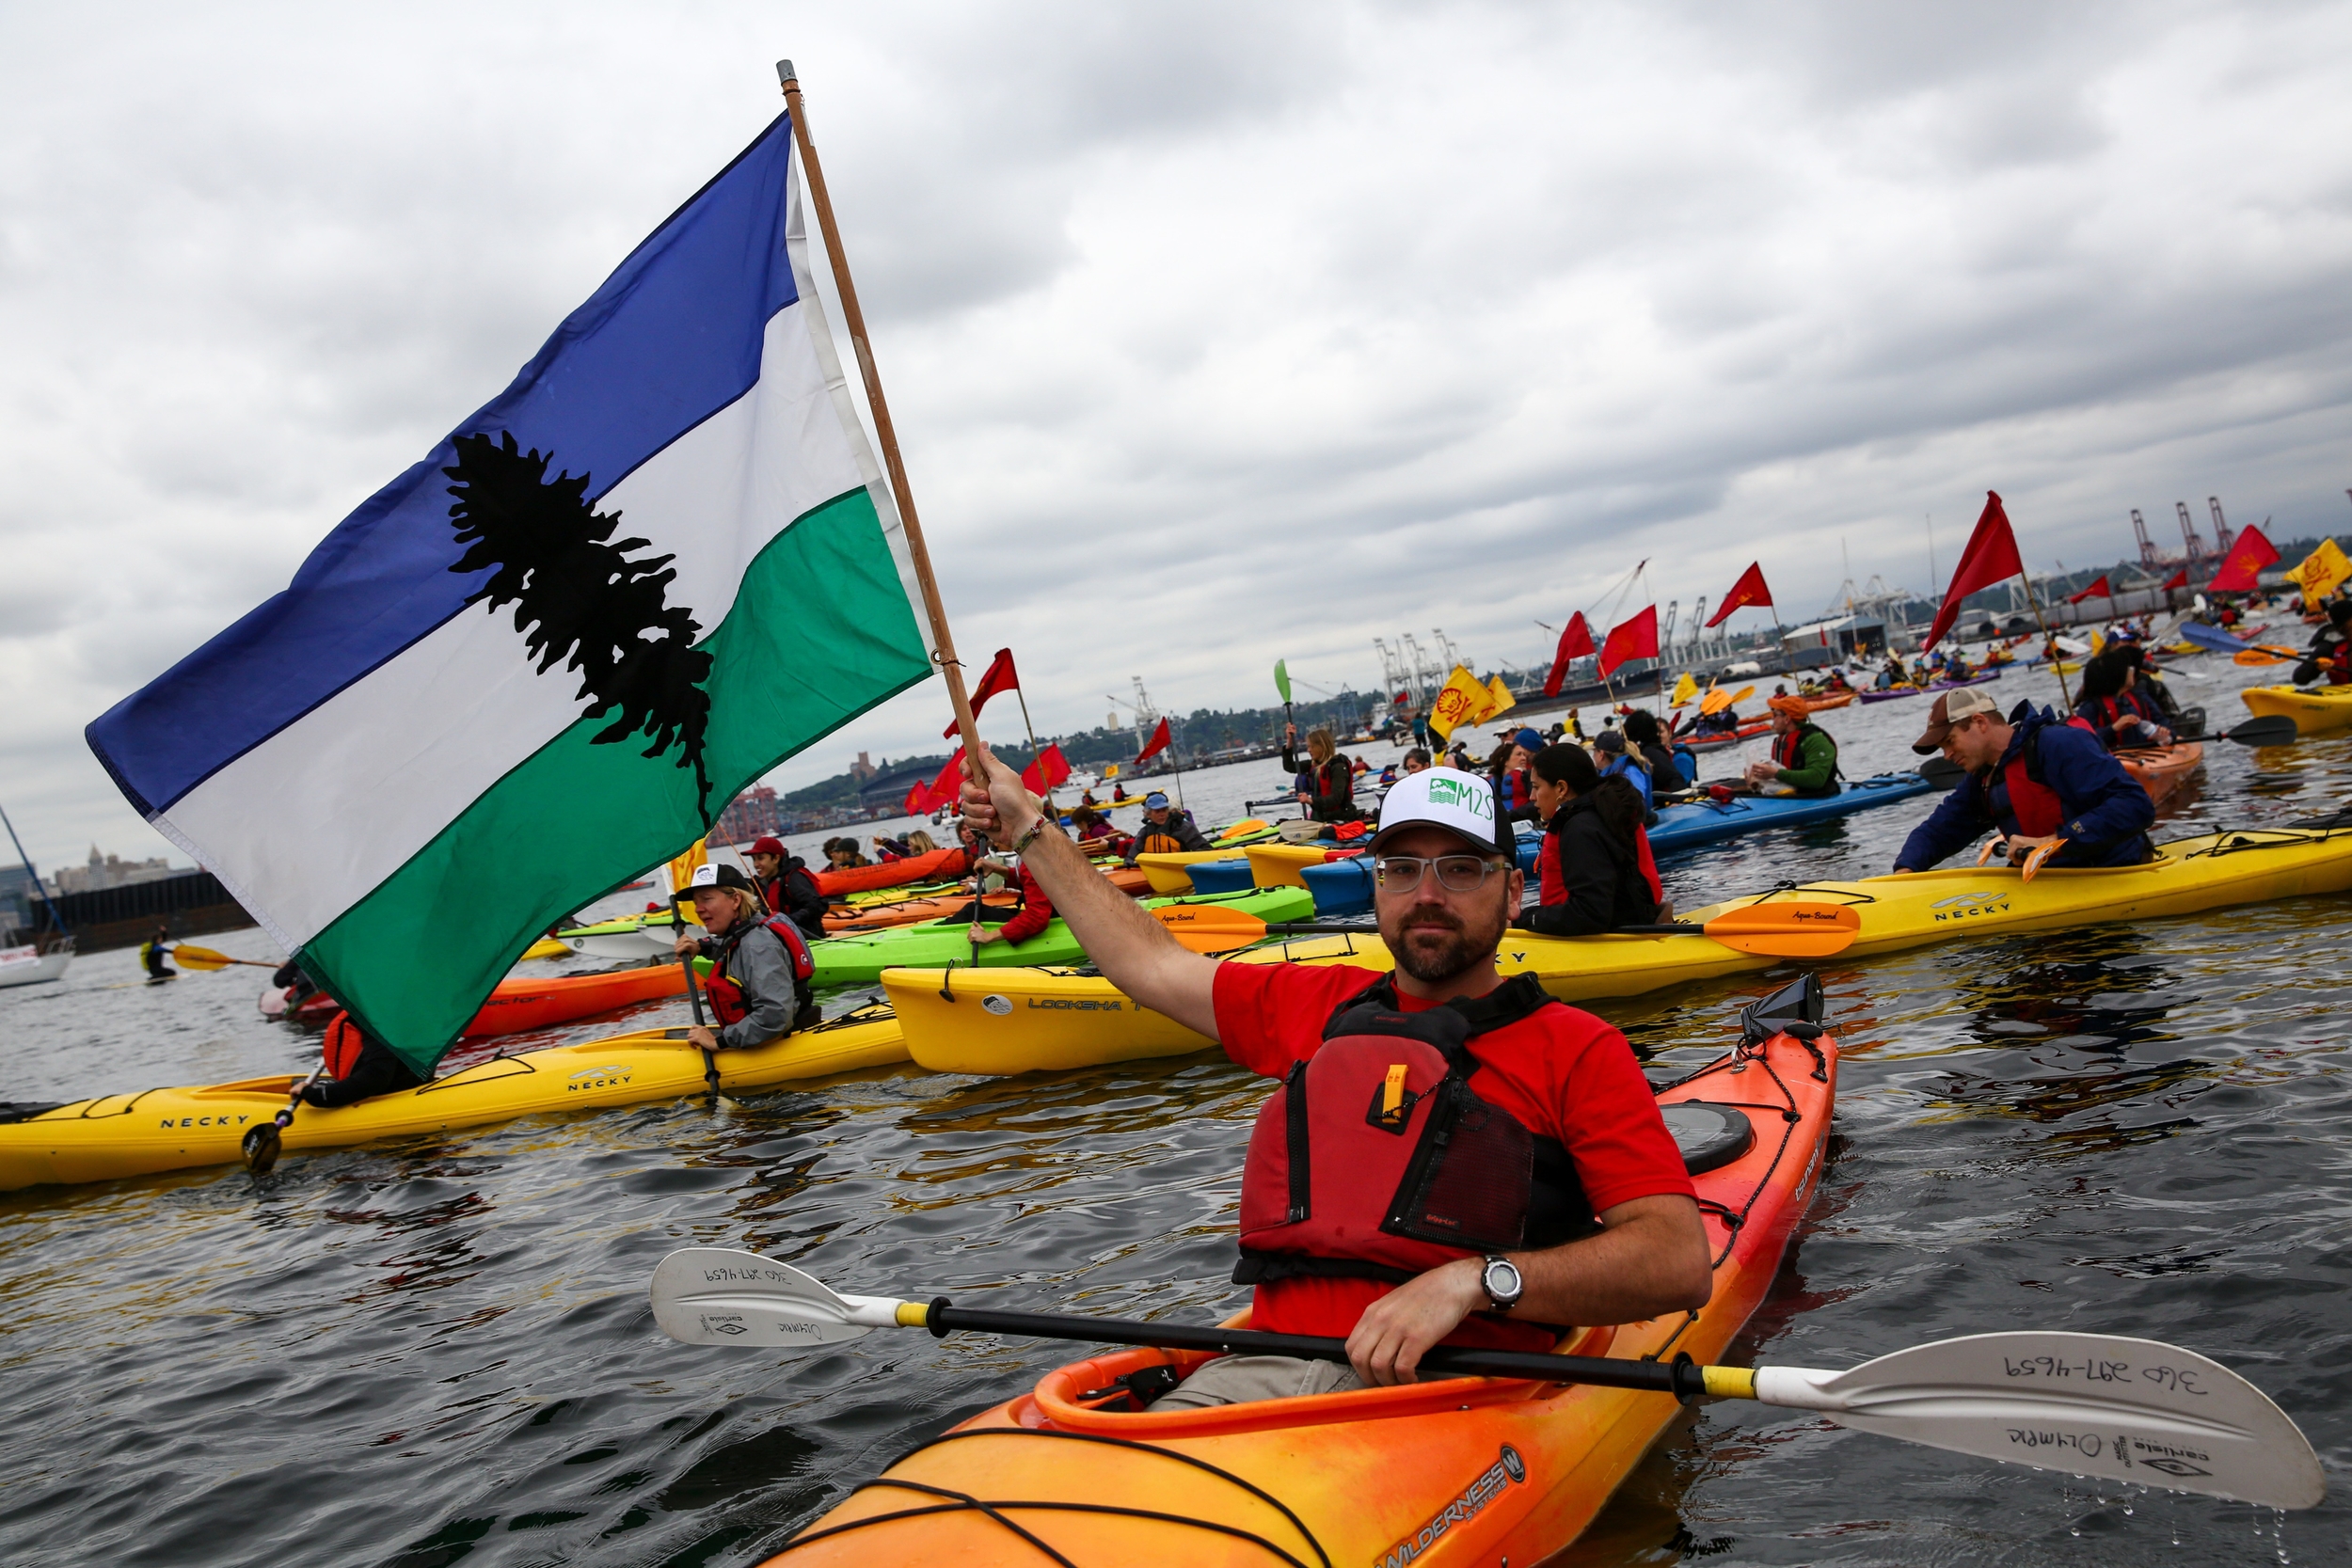   A man holds up a Cascadian flag as hundreds of kayaktivists take to the water during protest against drilling in the Arctic and the Port of Seattle being used as a port for the Shell Oil drilling rig Polar Pioneer. The protest flotilla drew many pa